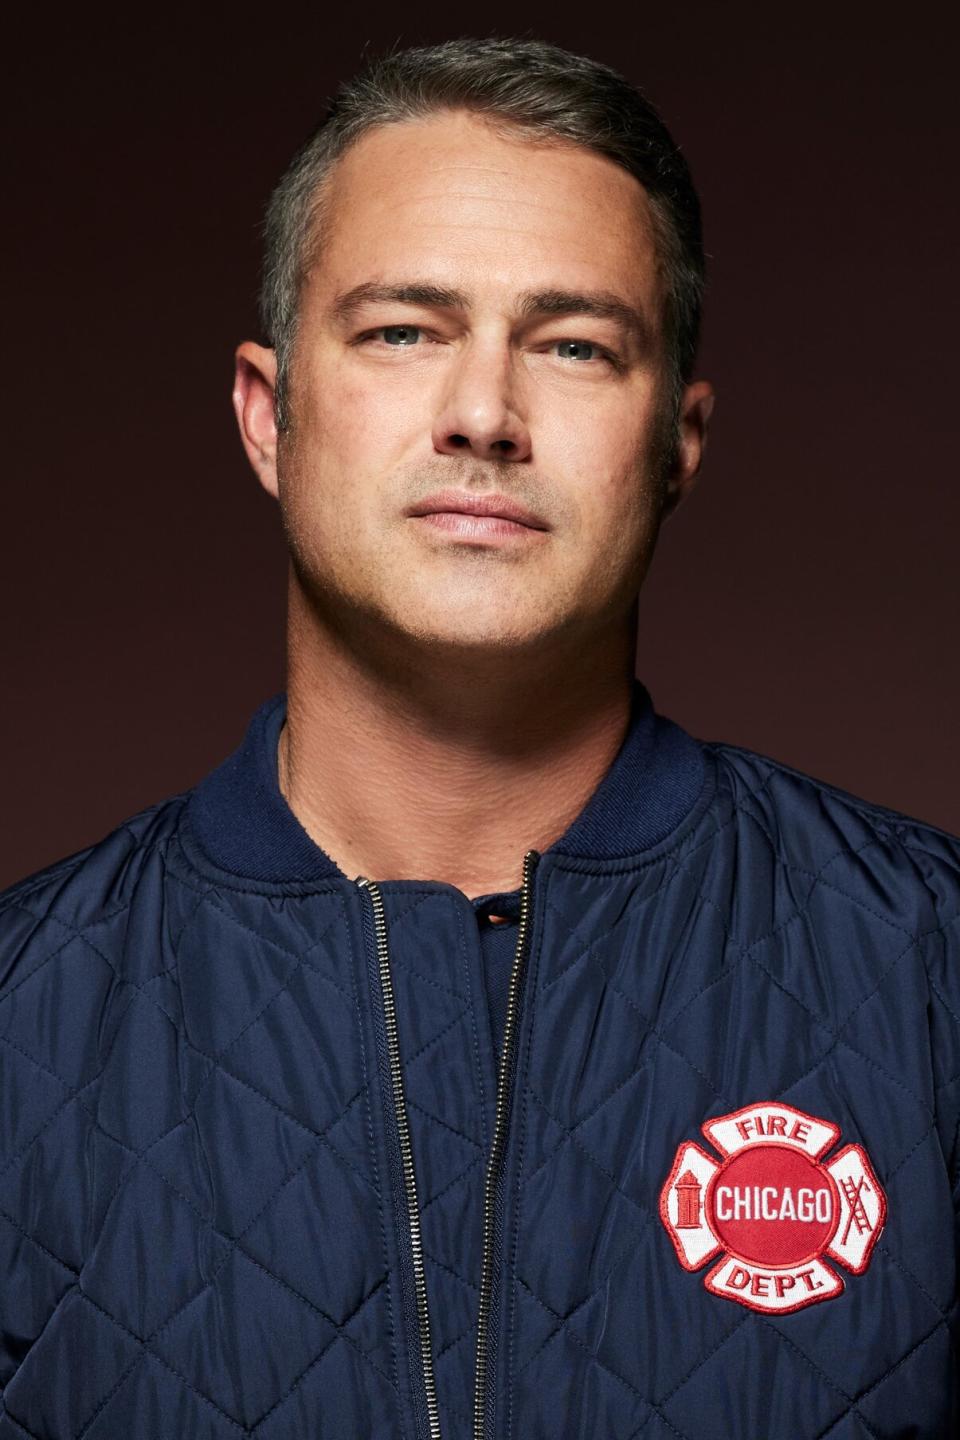 CHICAGO FIRE -- Season: 10 -- Pictured: Taylor Kinney as Kelly Severide